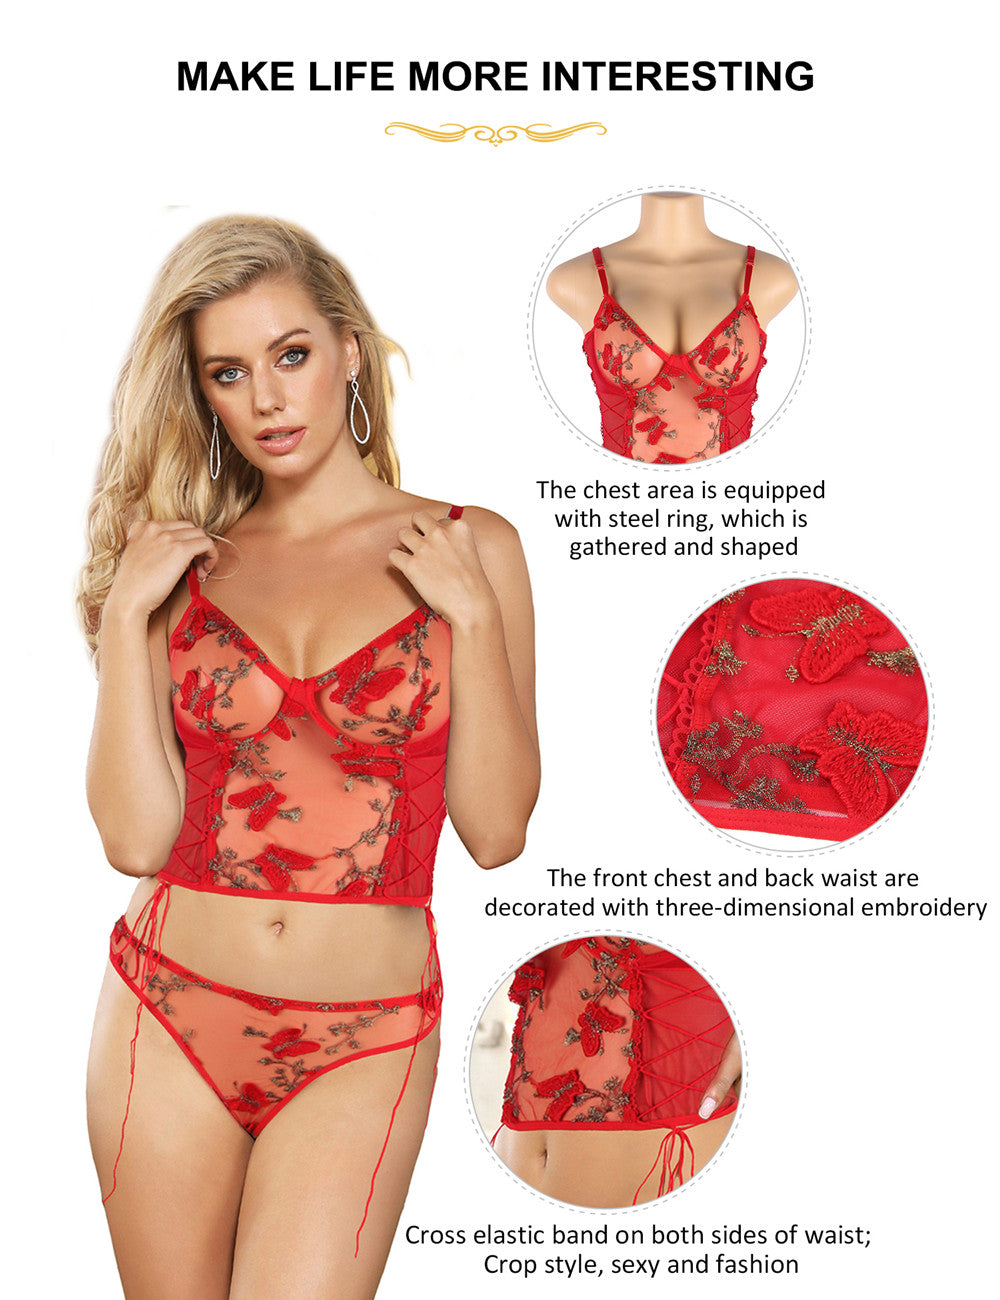 Butterfly Pattern Embroidery Mesh Lingerie Set With Underwire